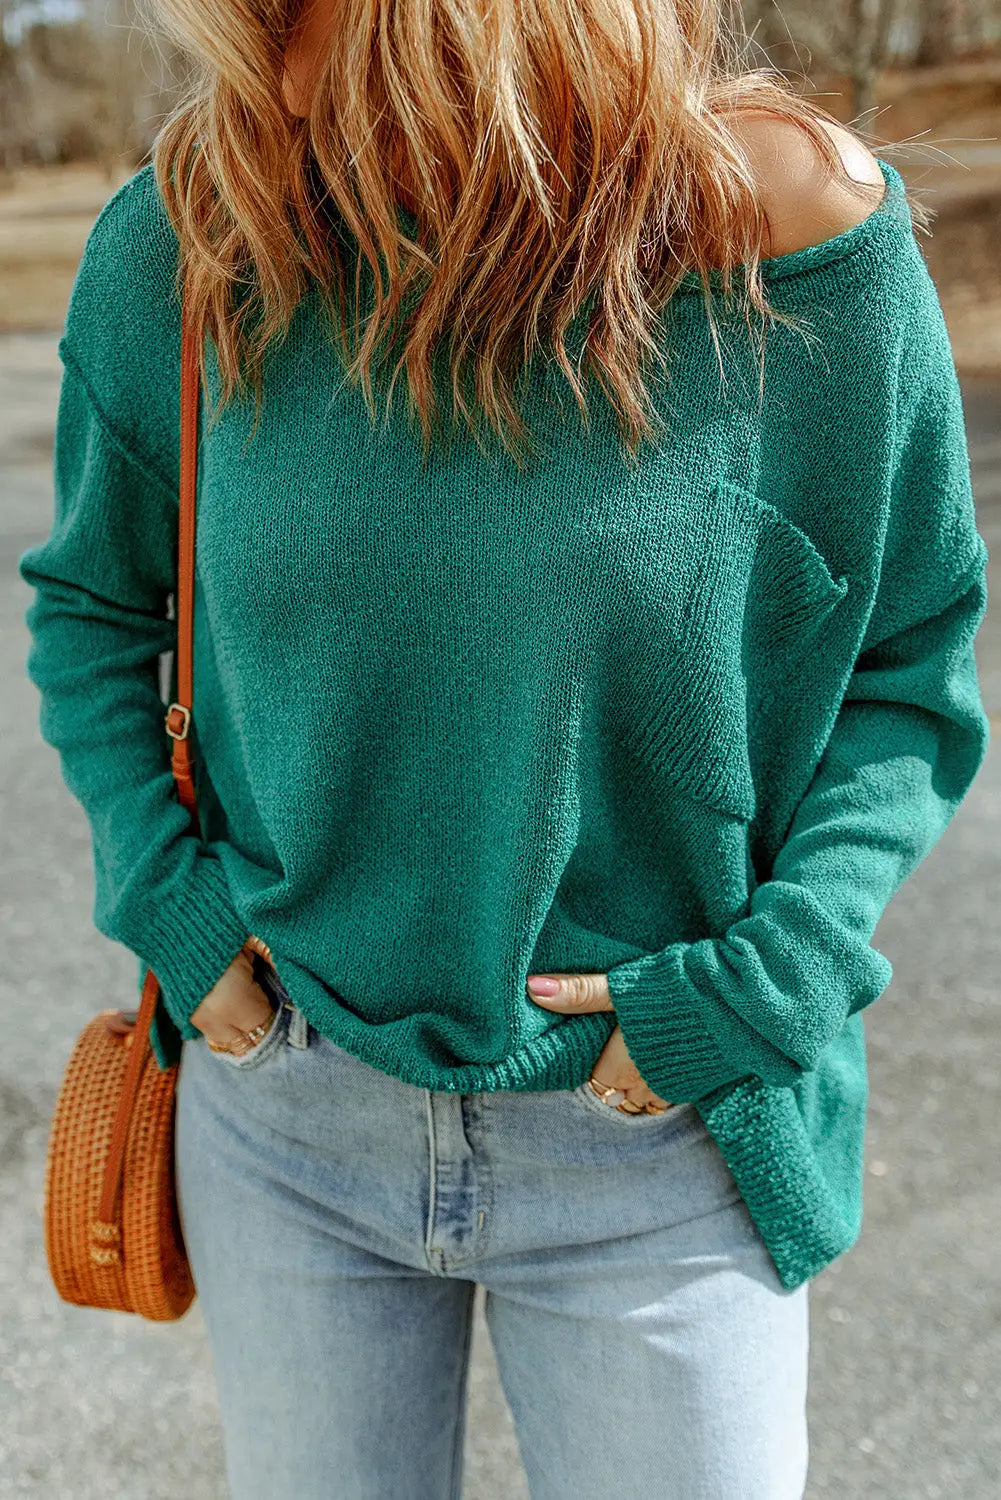 Black solid color off shoulder rib knit sweater with pocket - green / s / 100% acrylic - & cardigans